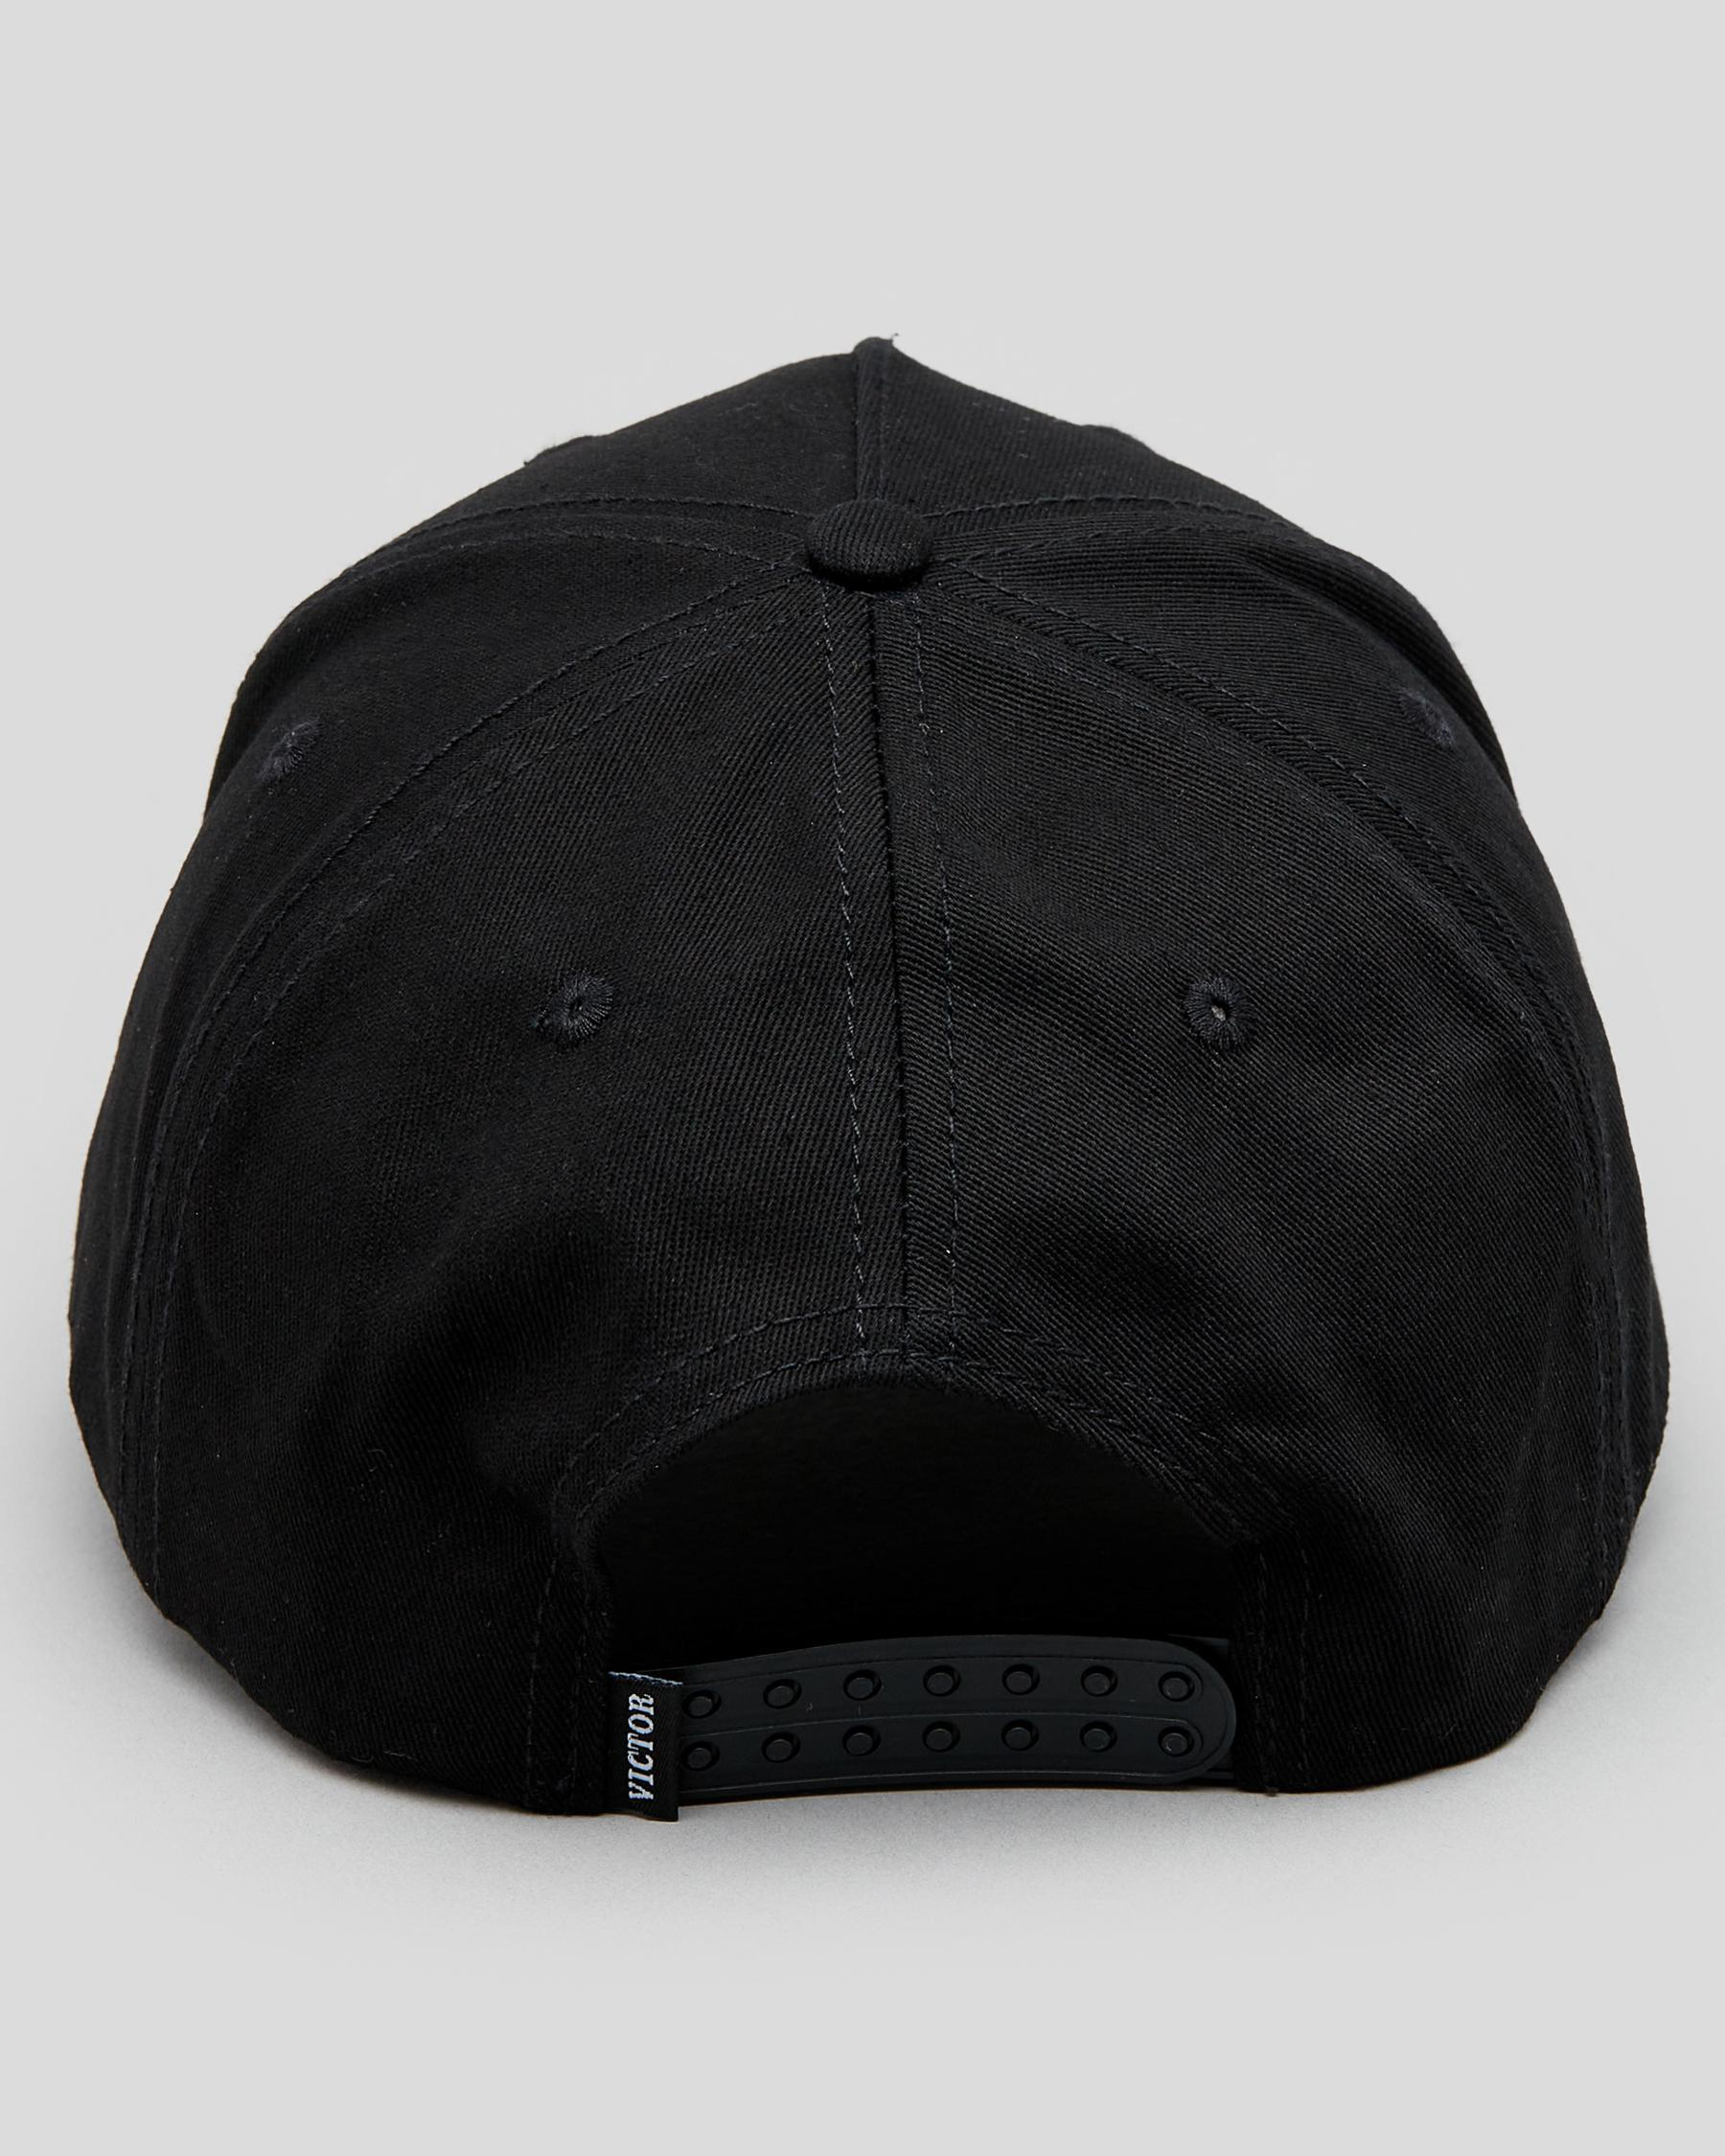 Victor Bravo's Thirsty Ghoul Hand Curved Peak Cap In Black - Fast ...